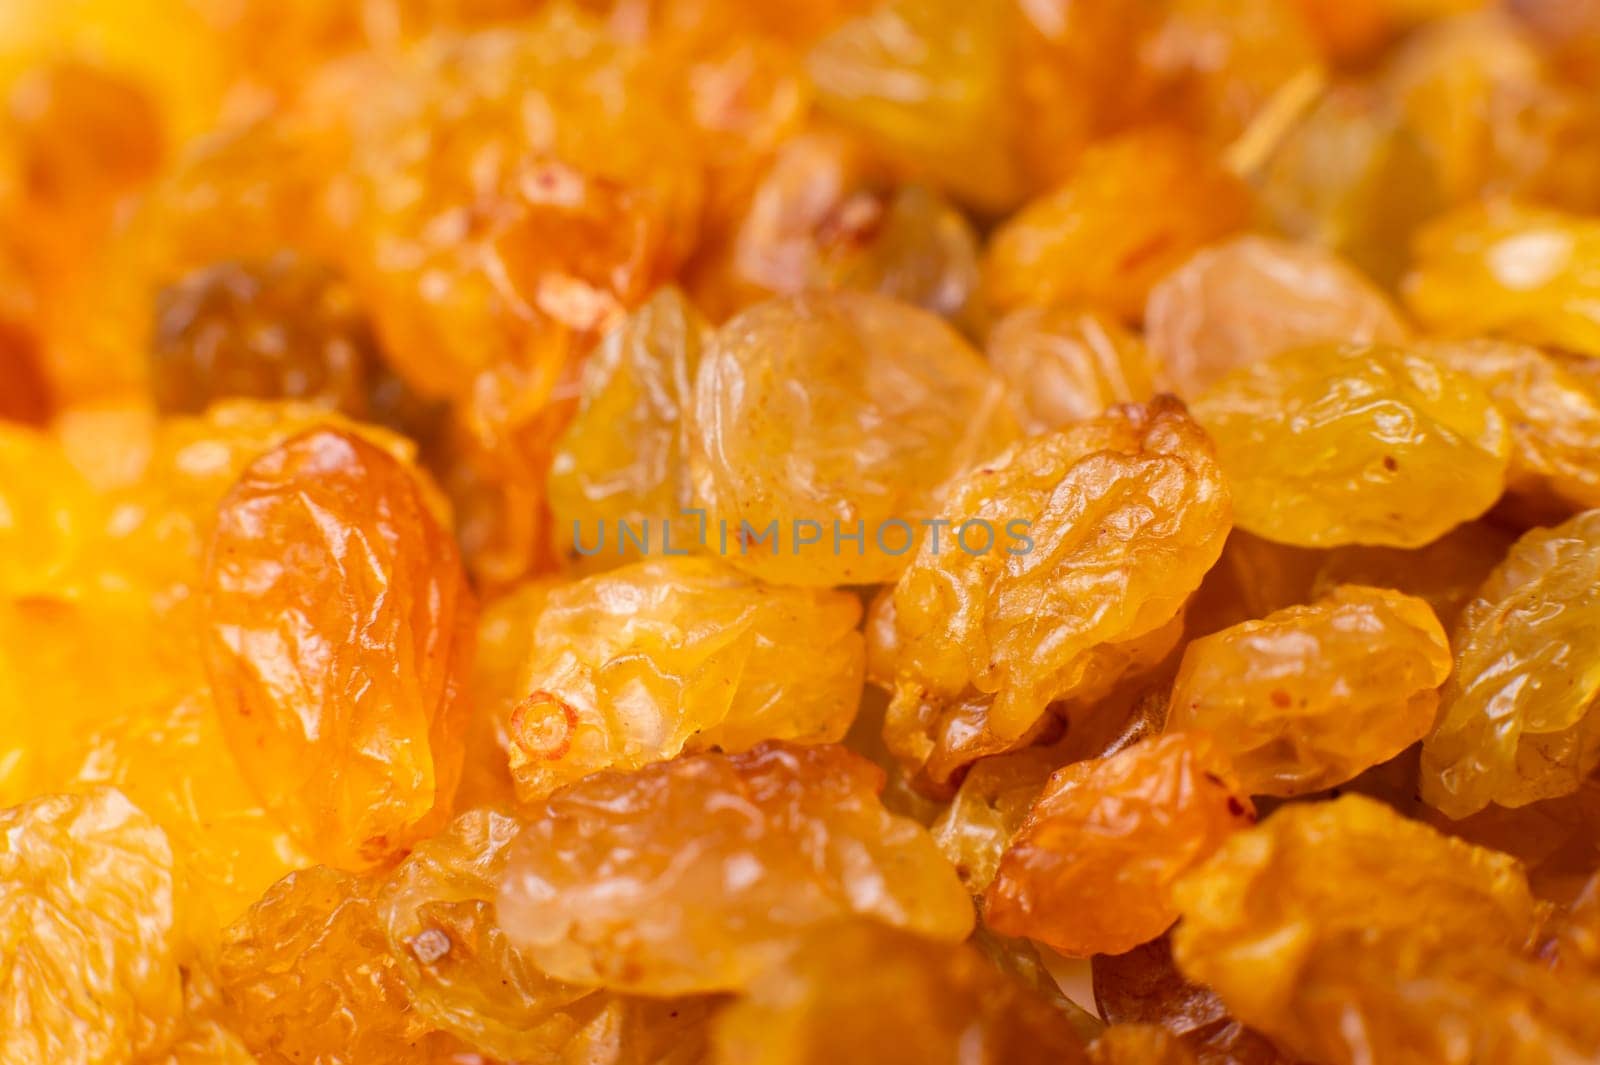 Background of a large number of dried yellow golden grapes. Raisin. Vegetarian diet.